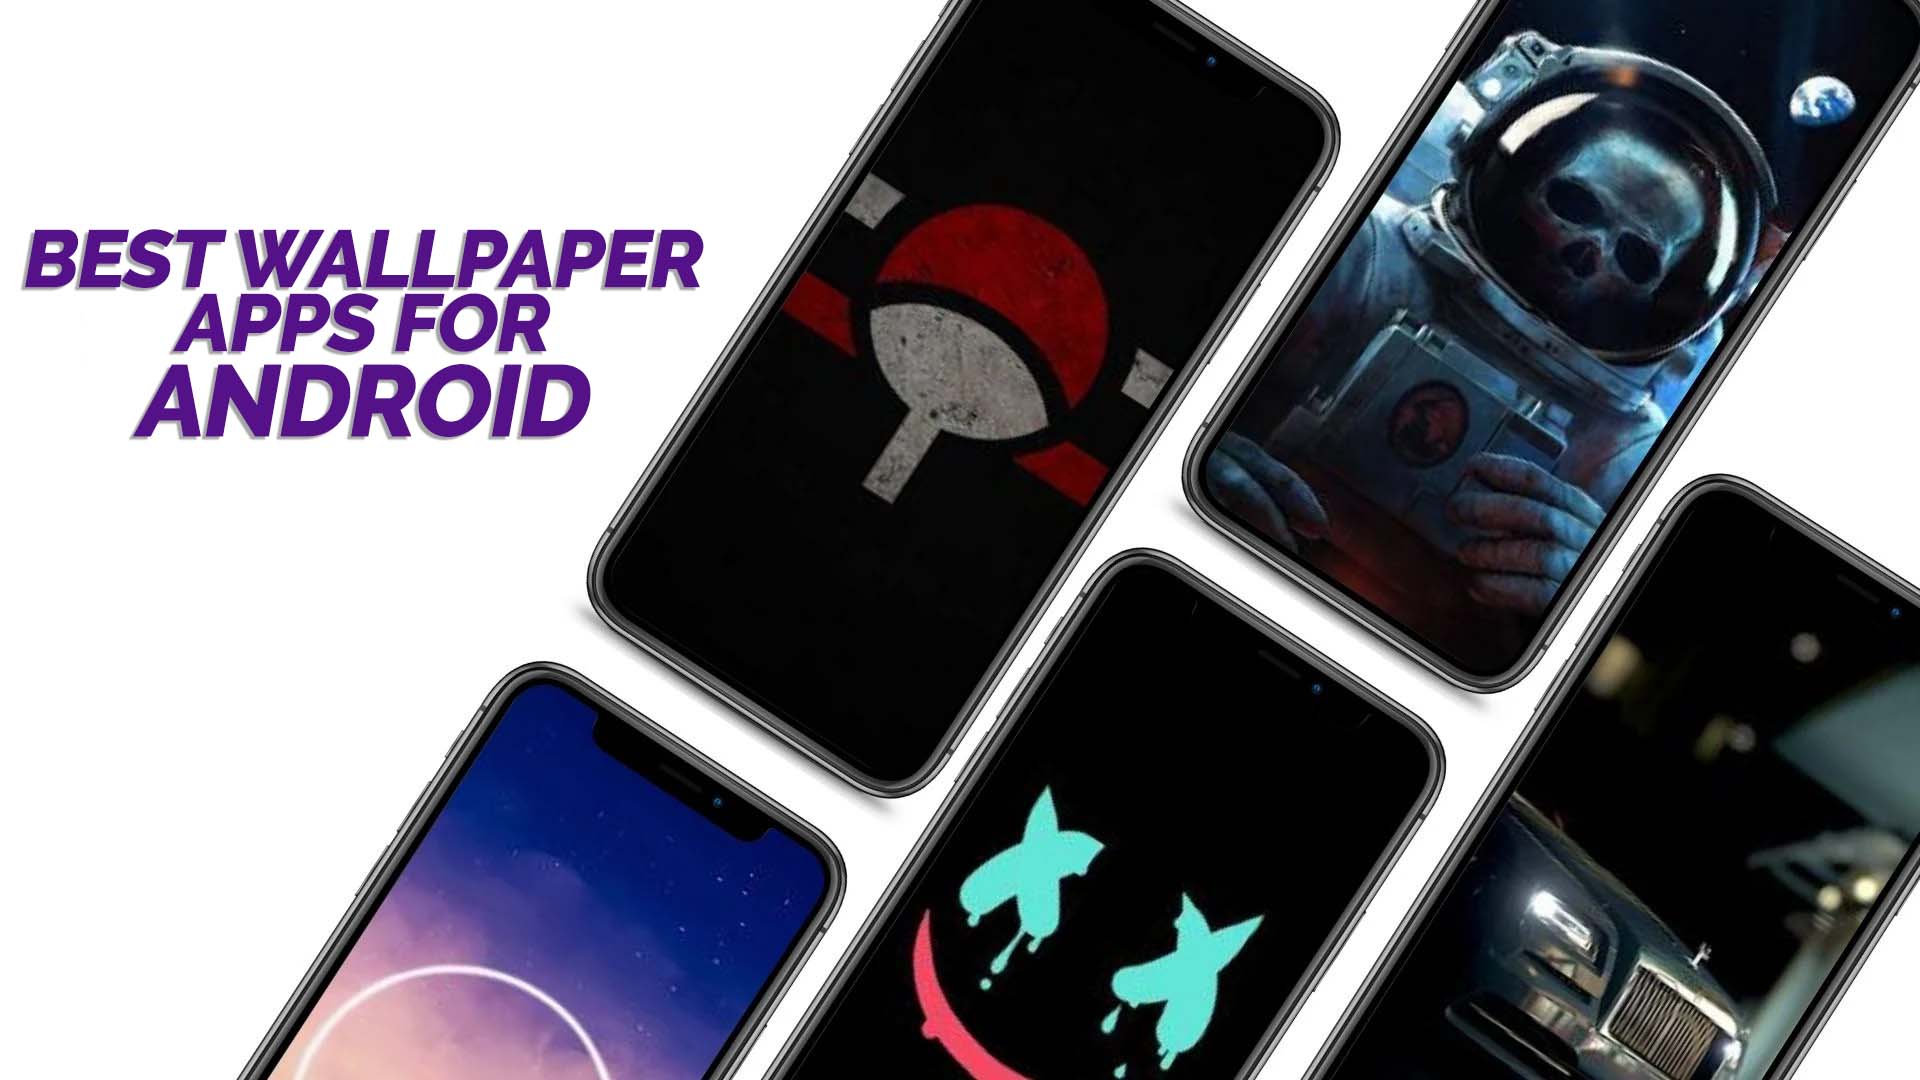 5 Best Anime Wallpapers Apps for Android in 2021